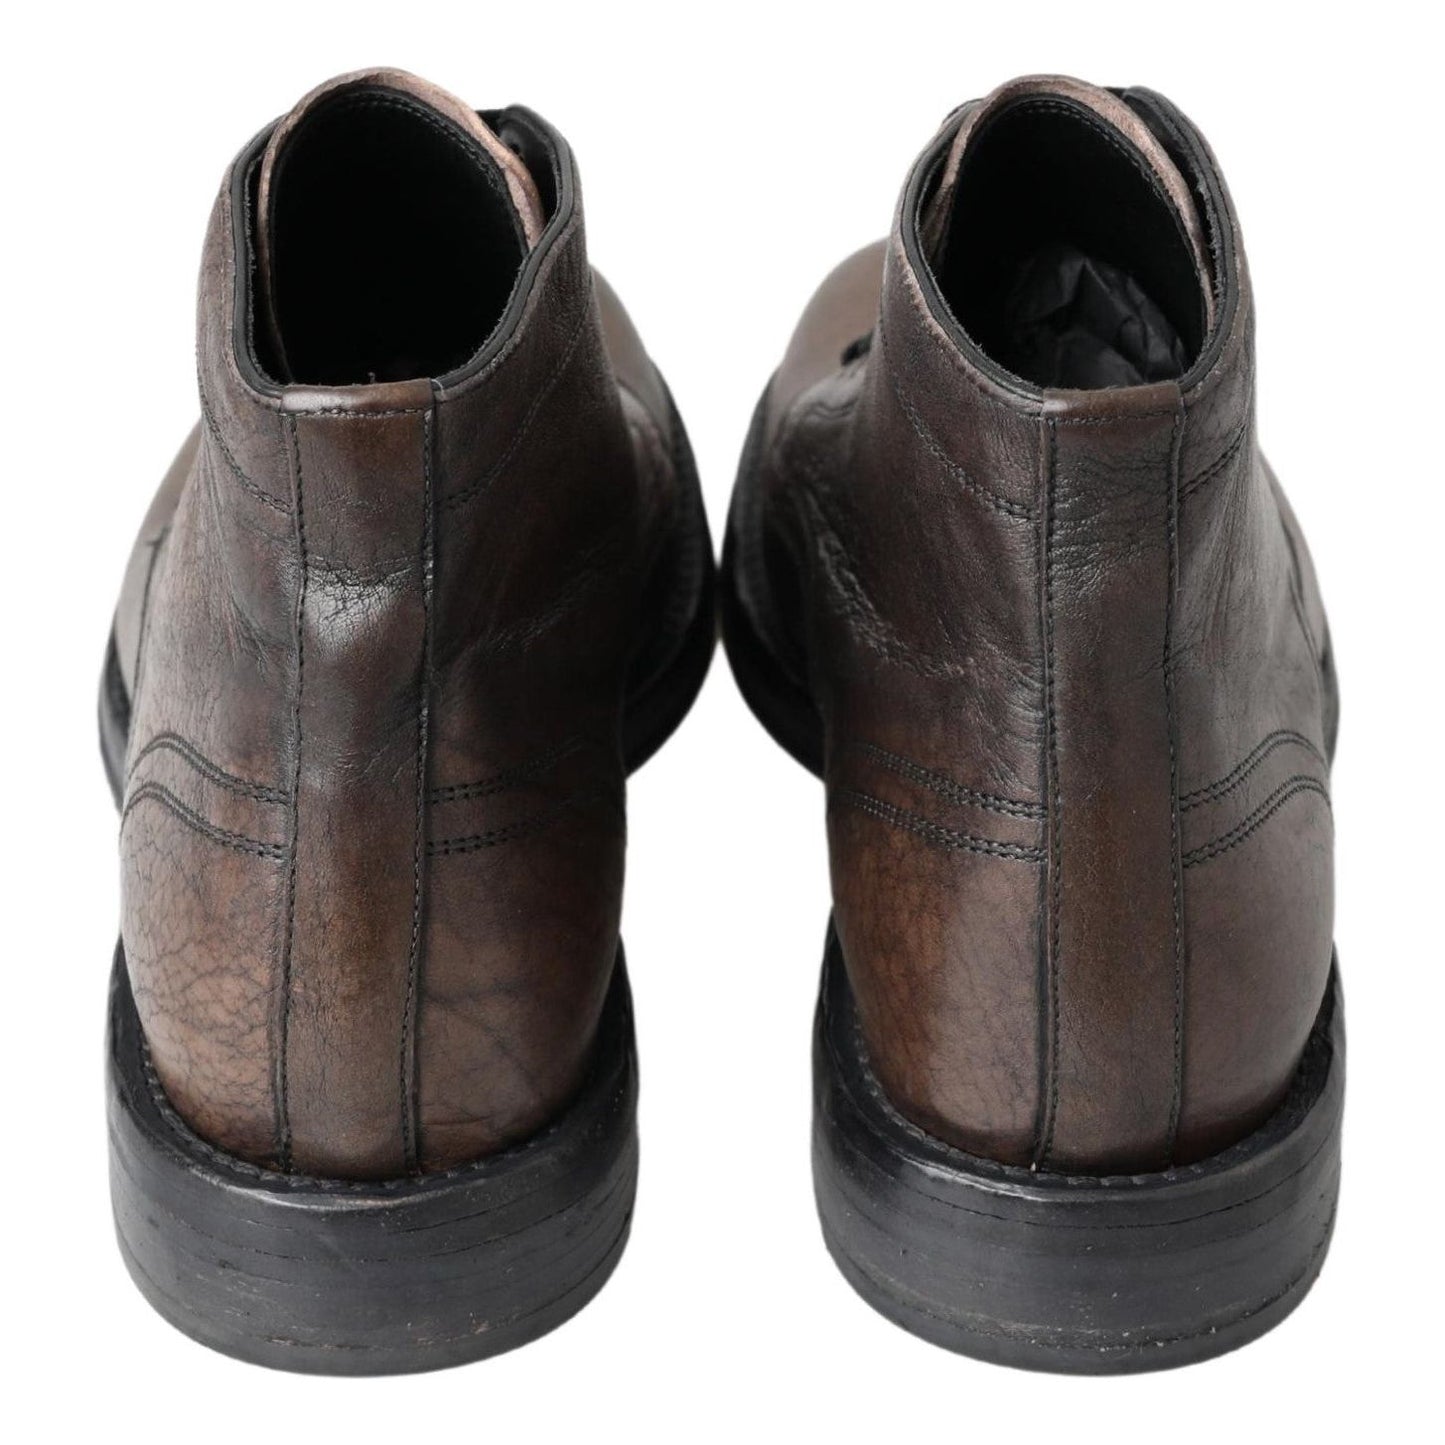 Dolce & Gabbana Elegant Horse Leather Lace-Up Boots brown-horse-leather-perugino-shoes 465A9846-ee7fa419-258.jpg